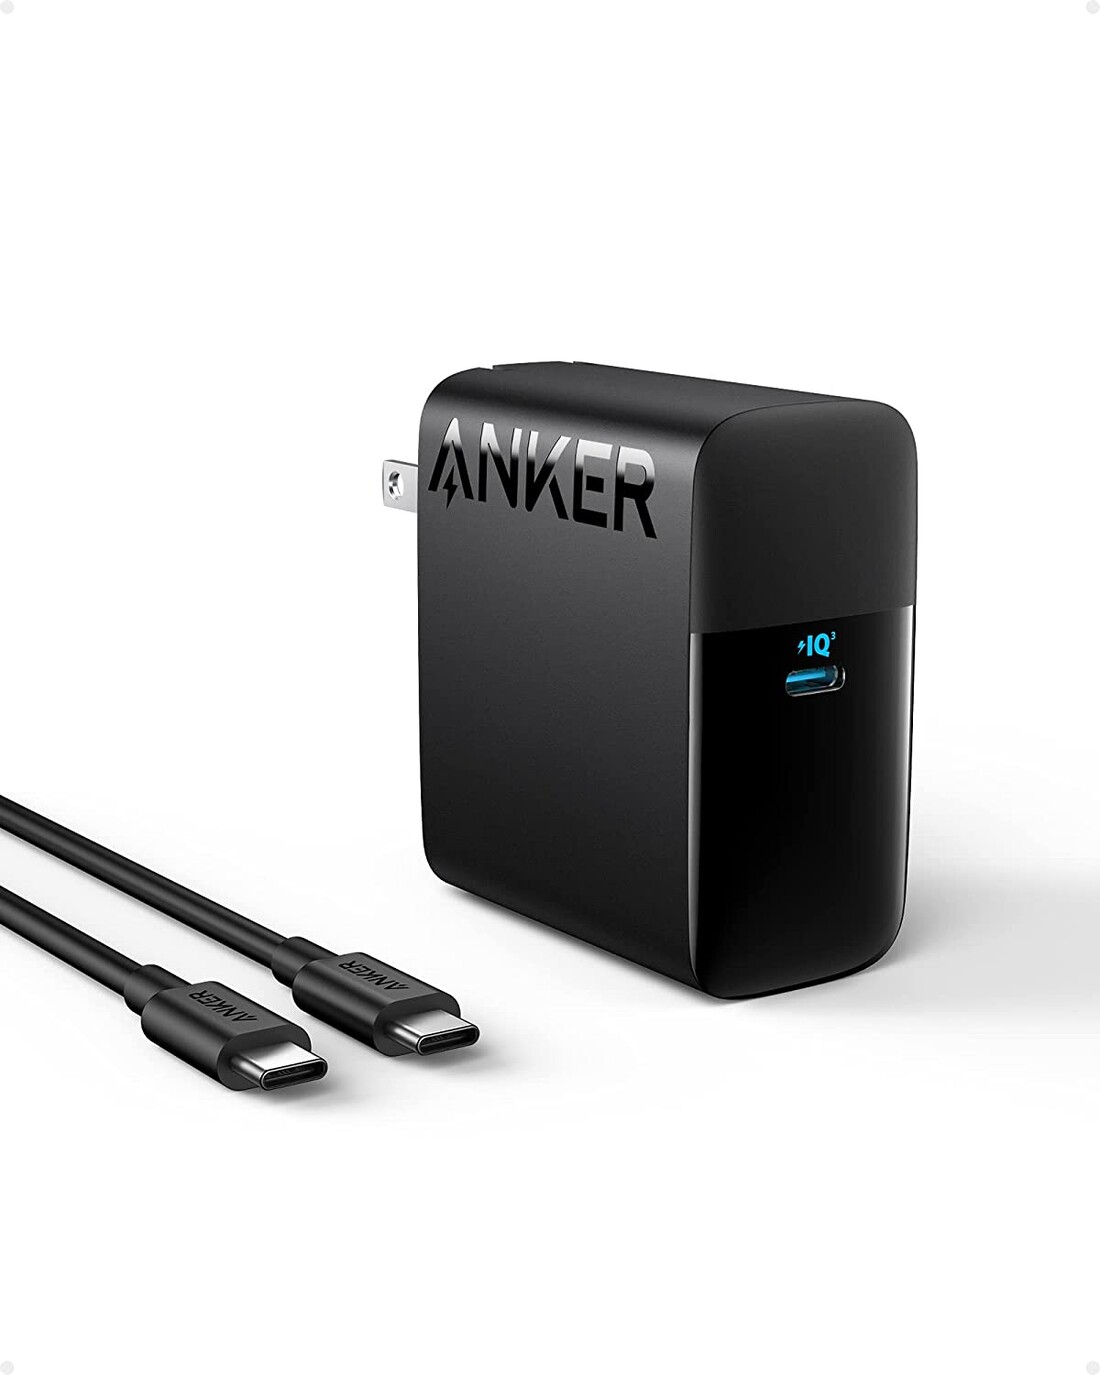 The Anker 317 is a 100W USB-C charger. (Image source: Anker via Amazon)